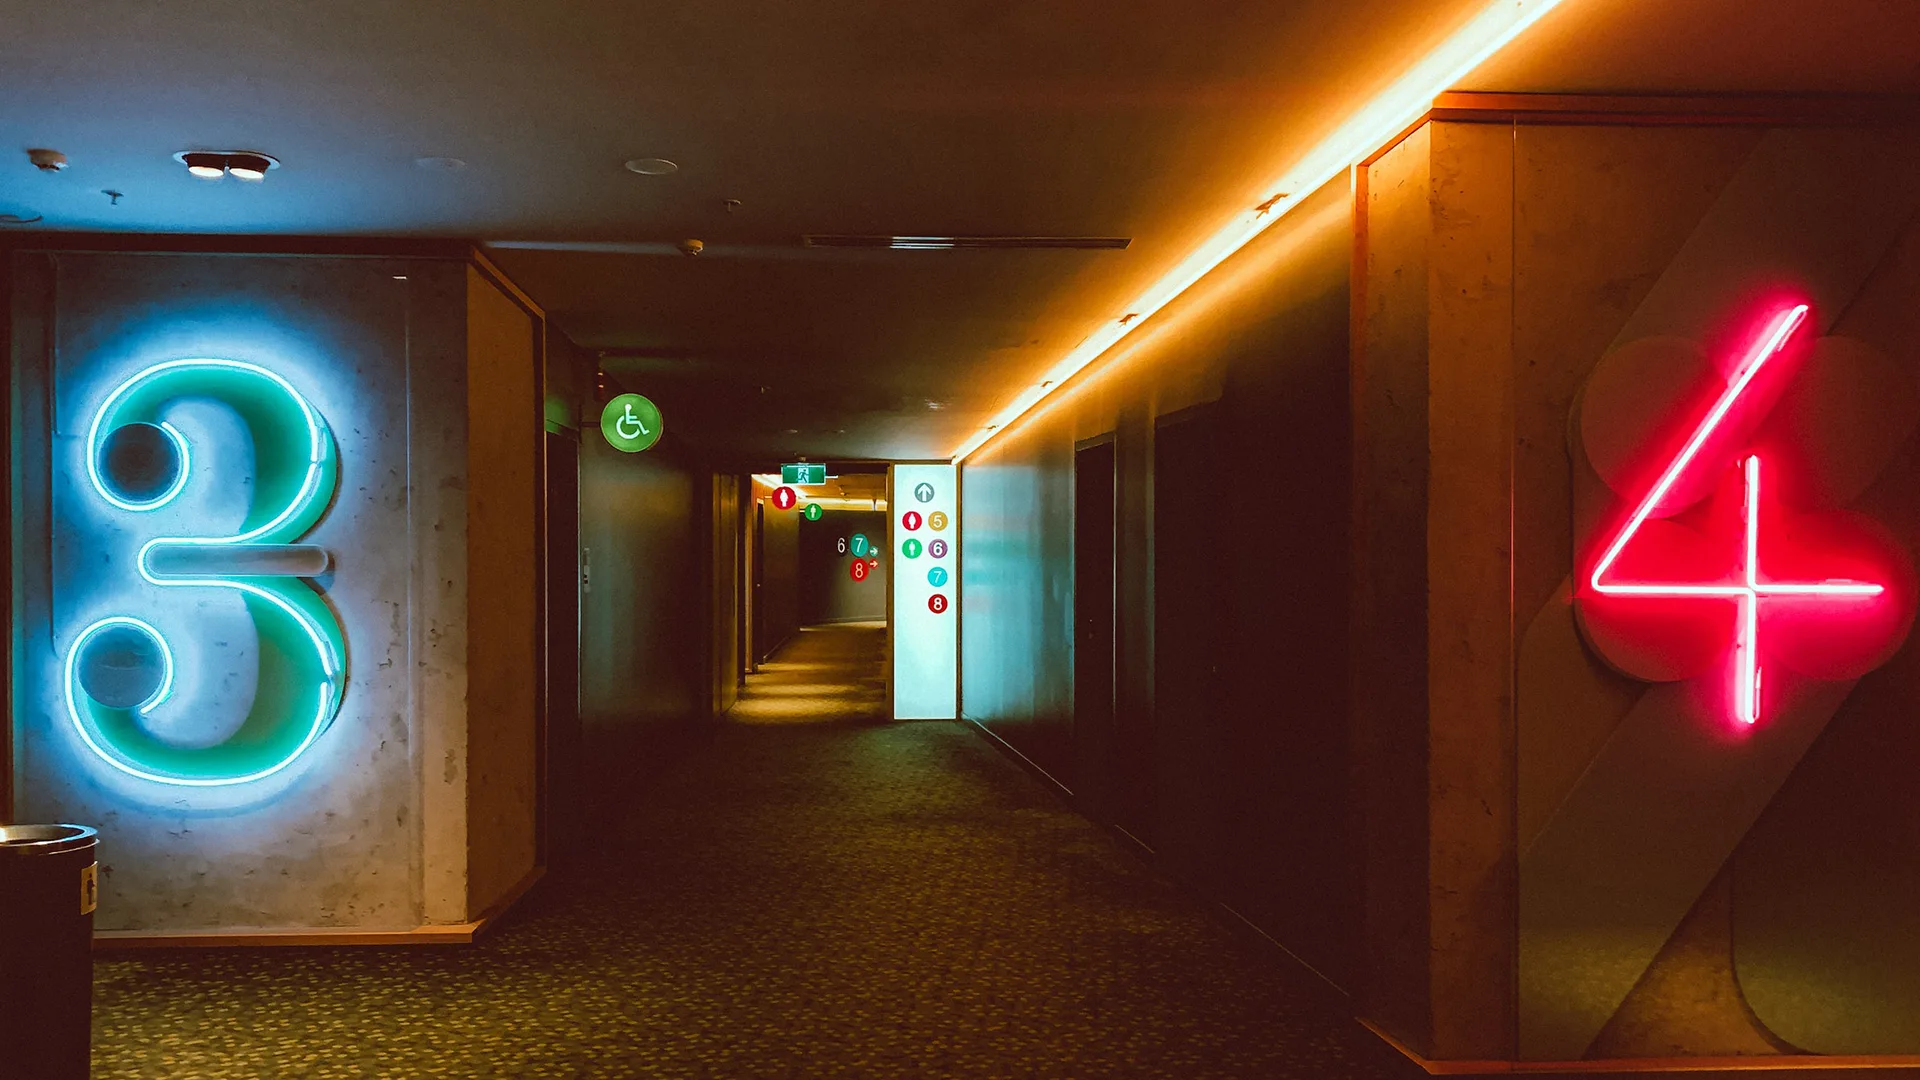 Neon numbers in a dimly lit hotel corridor